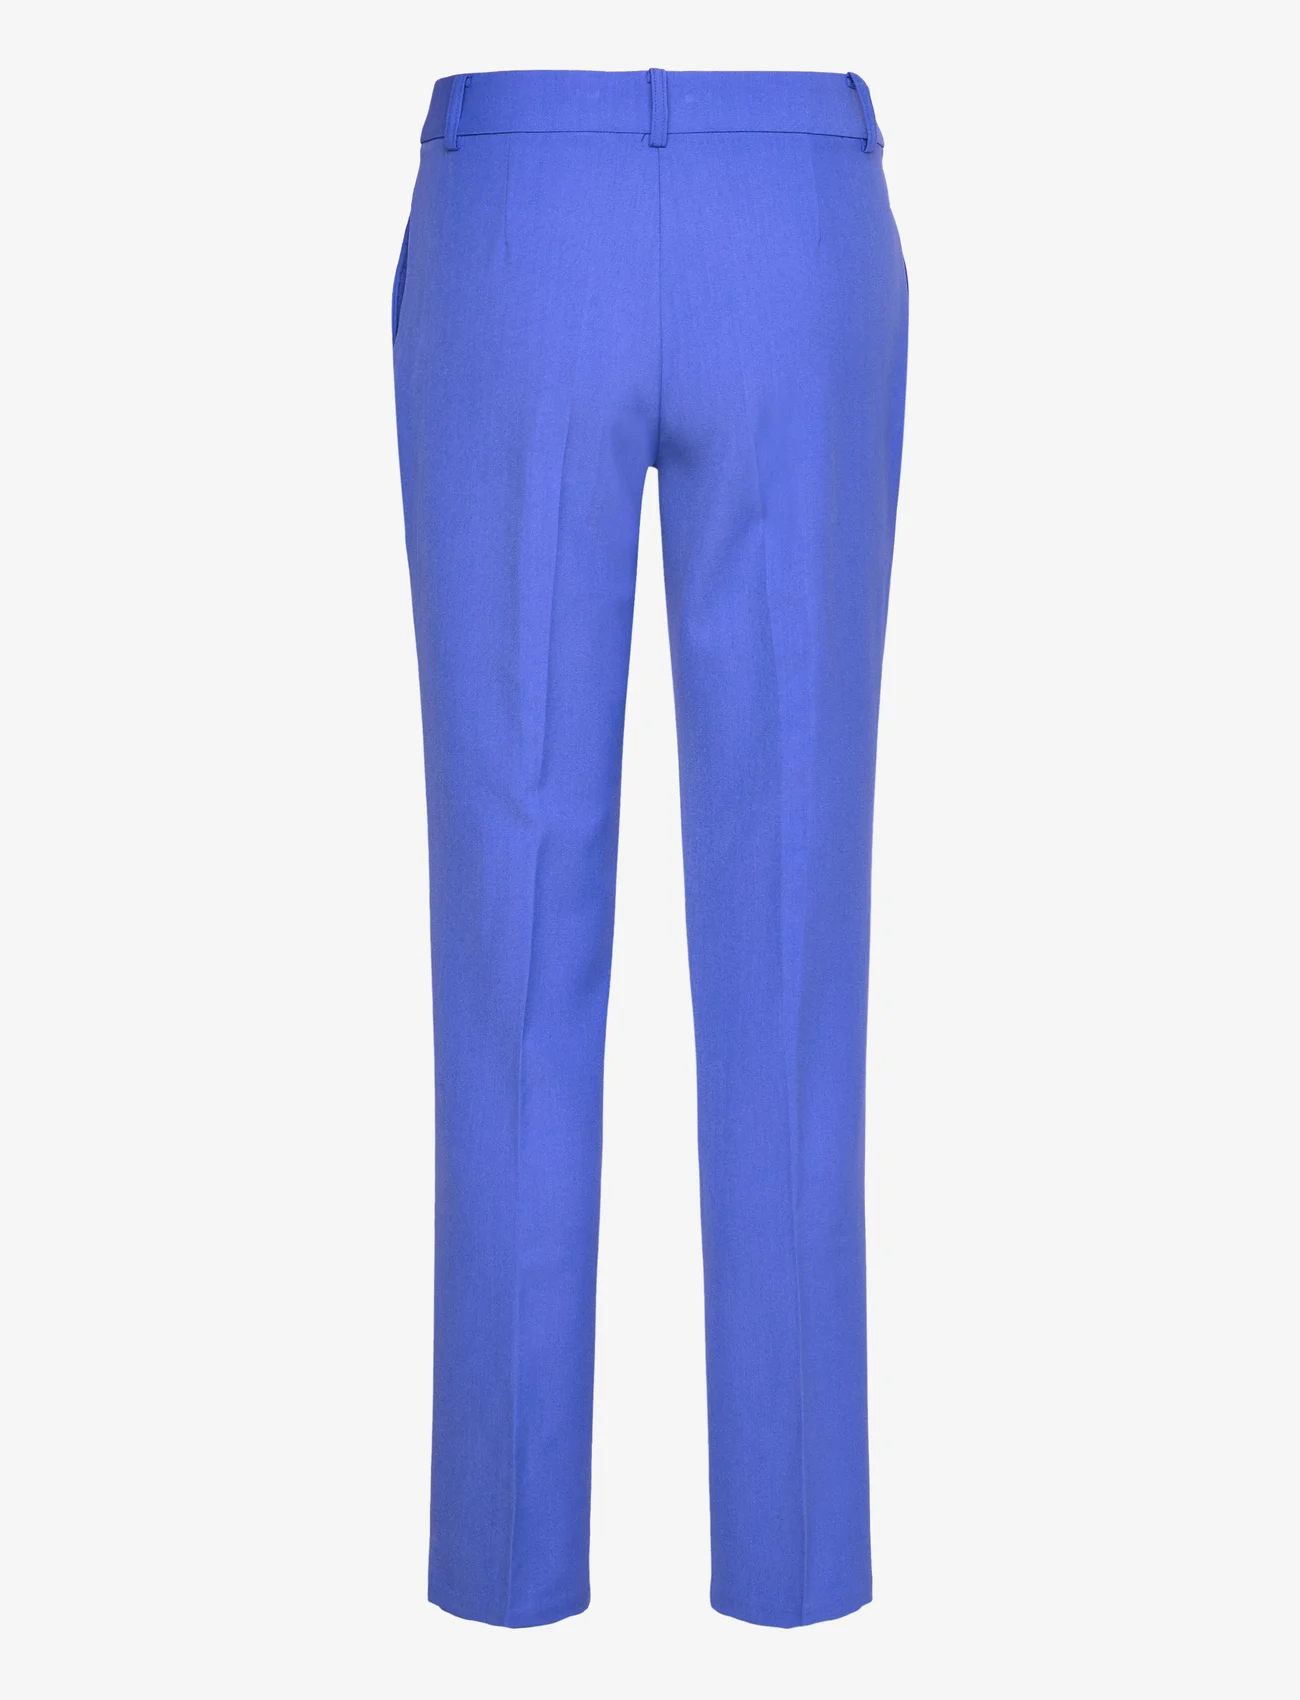 Brandtex - Suiting pants - formell - clear blue - 1